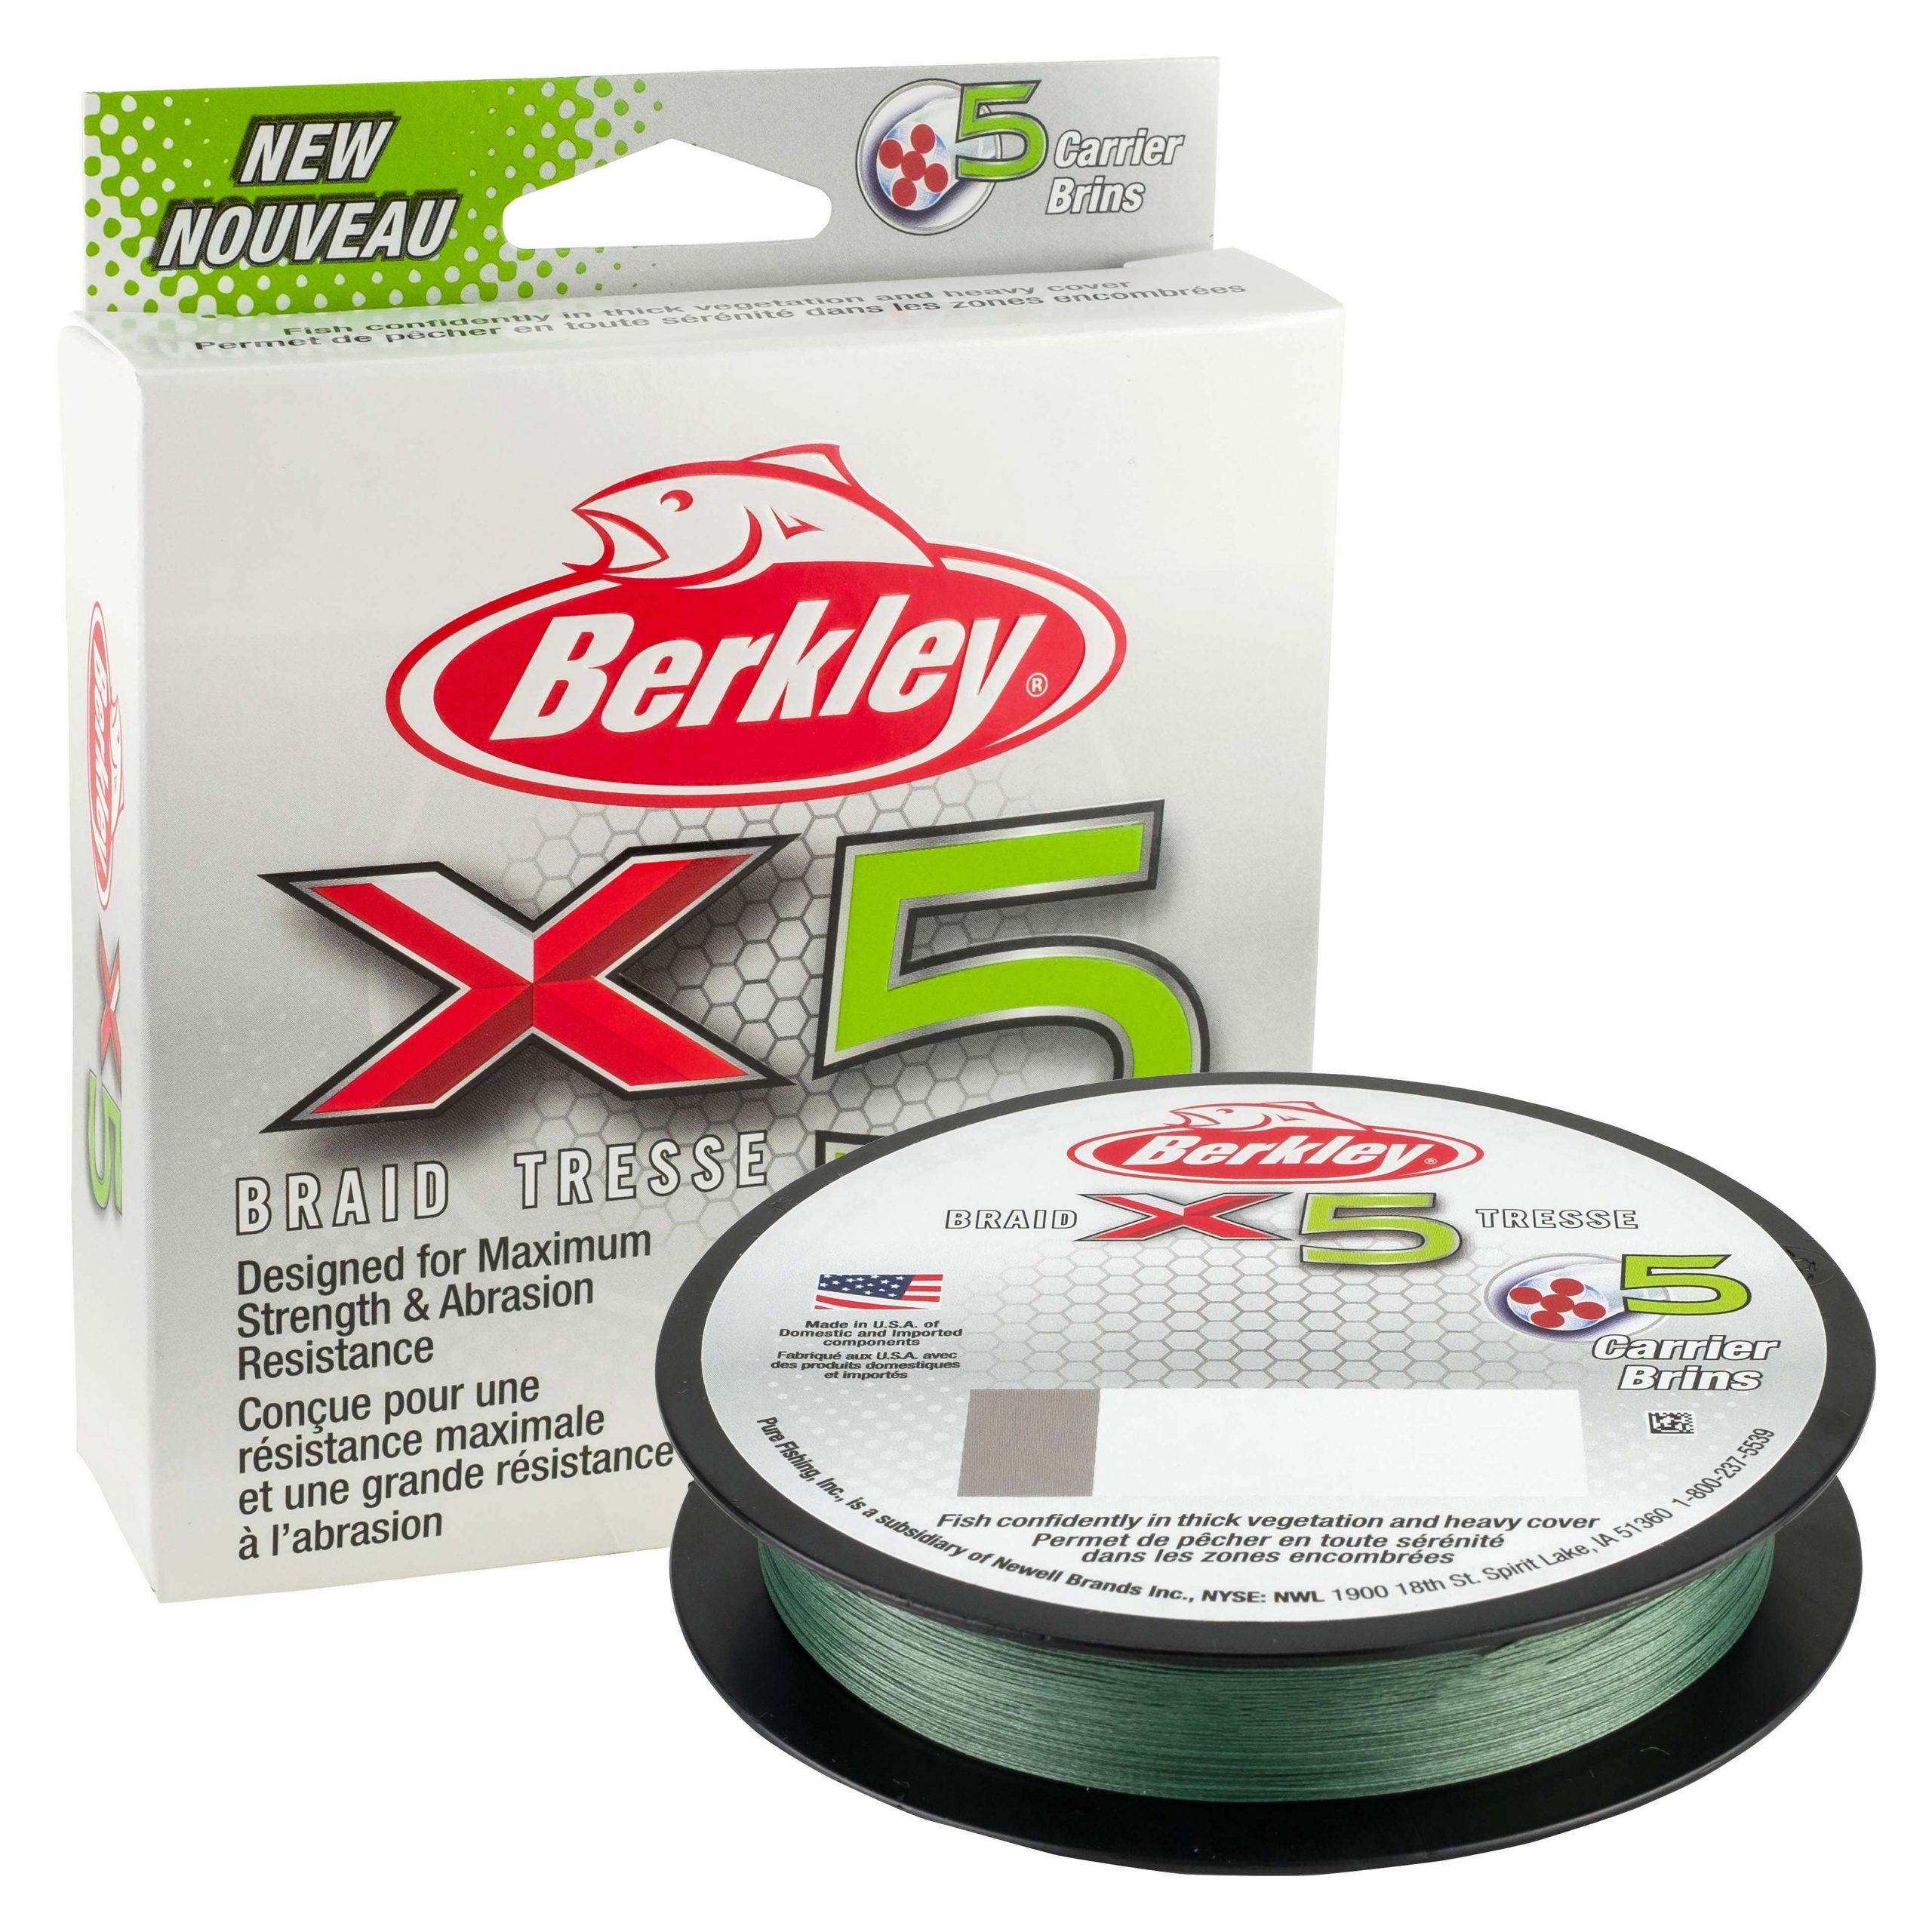 X5 Braid<BR>
Berkley<BR>
$13.99/165 yd. spool<BR>
Strength and reliability play an important role in selecting a braided line, which is why many anglers typically use braided lines comprised of either four or eight strands. The new Berkley x5 and x9 braided lines take strength and reliability to the next level by adding another strand, respectively, all while keeping the same diameter as traditional four- and eight-carrier braids. Available in 8-80 lb. test. 